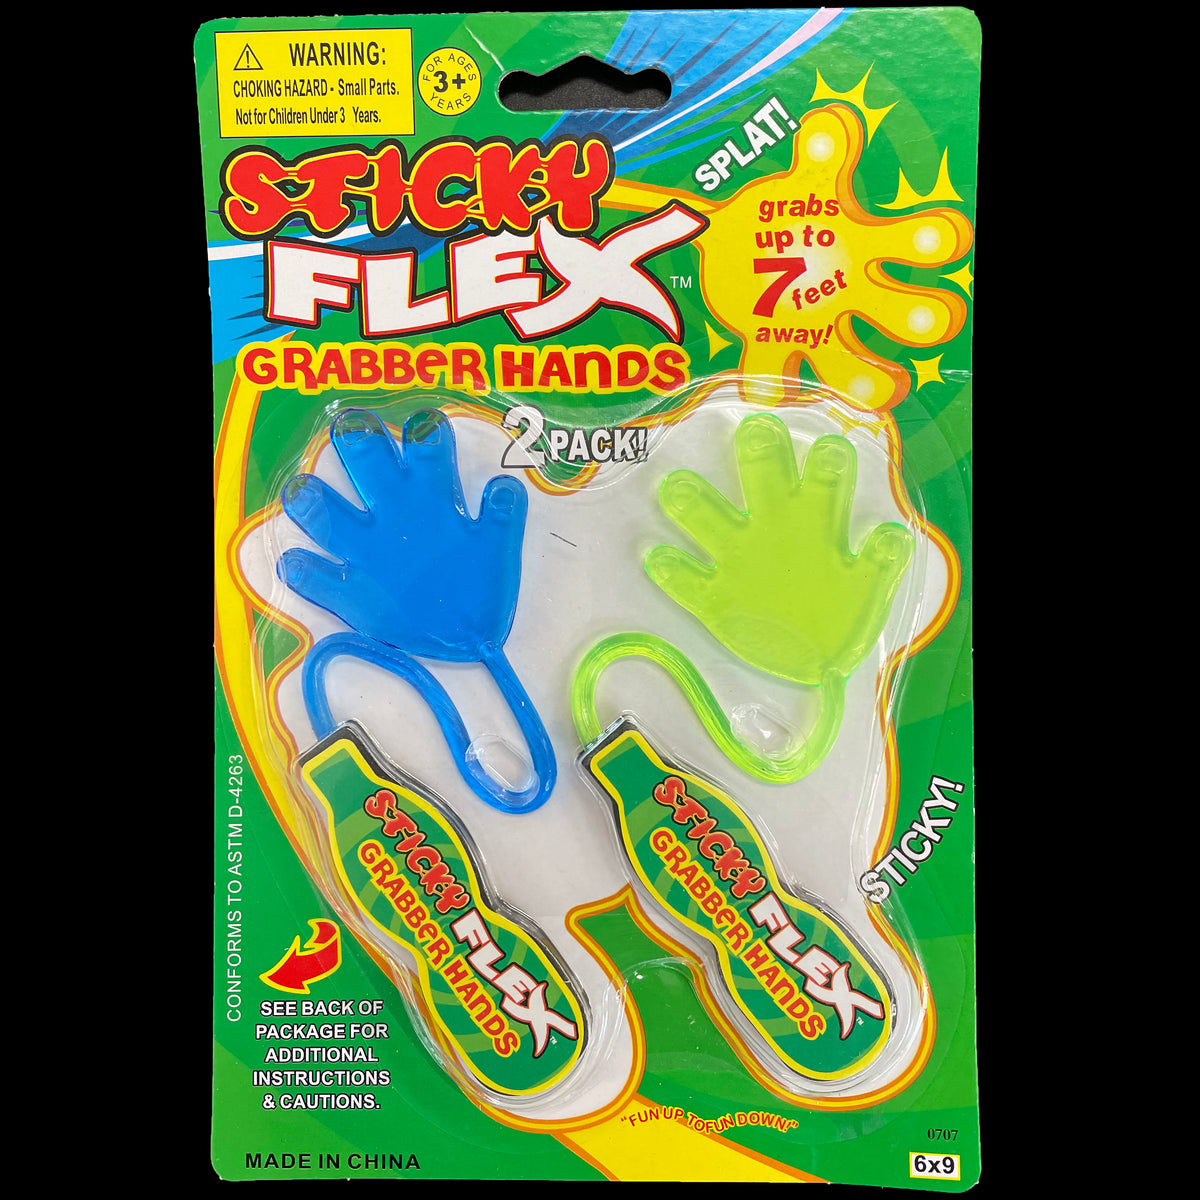 1 Pack Two Sticky Flex Grabber Hands Grab up to 7 feet with 2 inches Hand